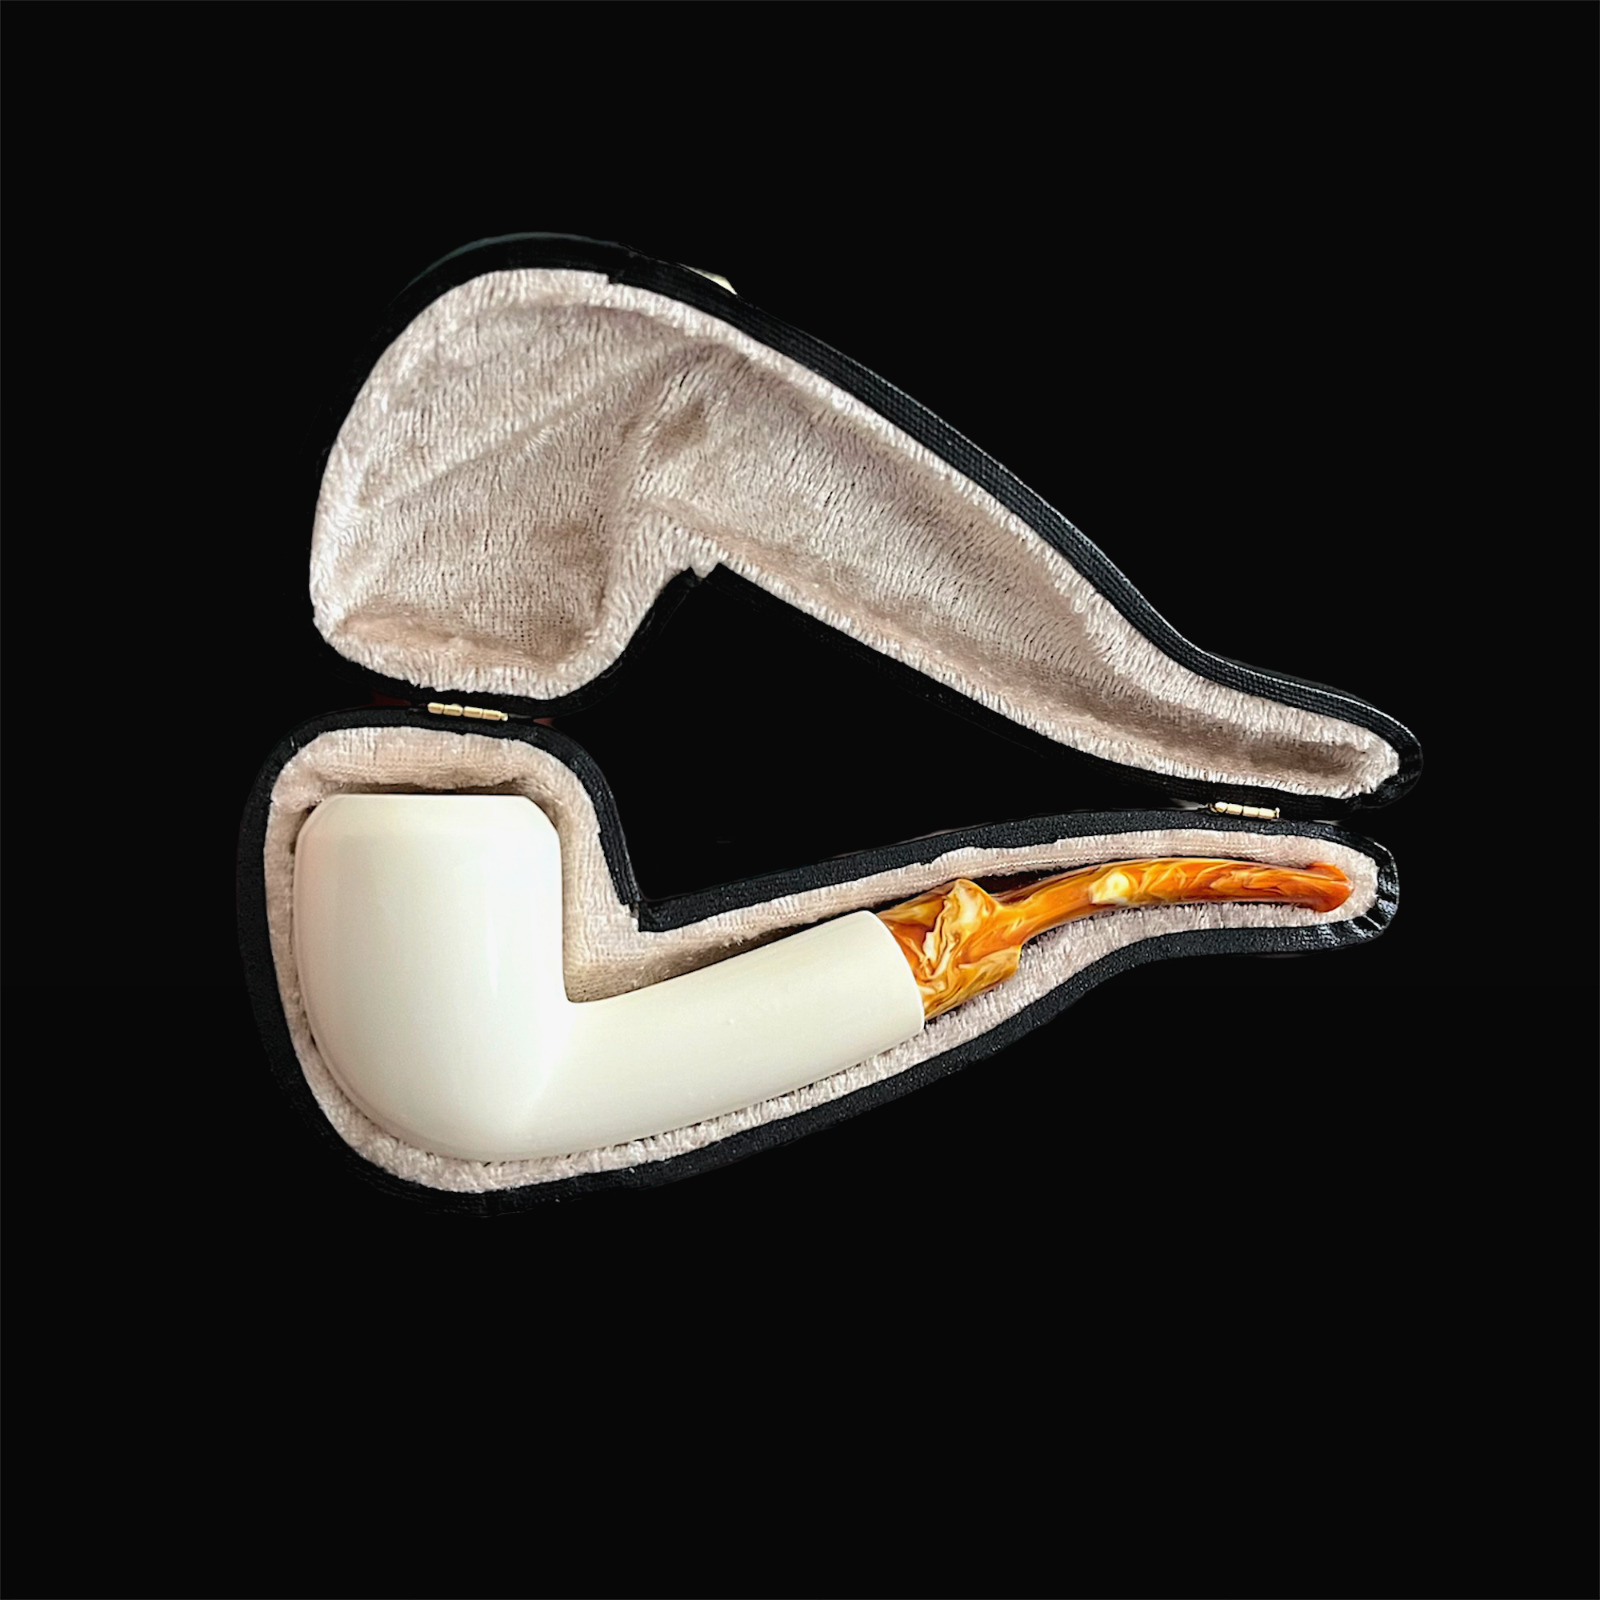 Block Meerschaum Pipe hand-carved smoking tobacco pipe unsmoked w case MD-400